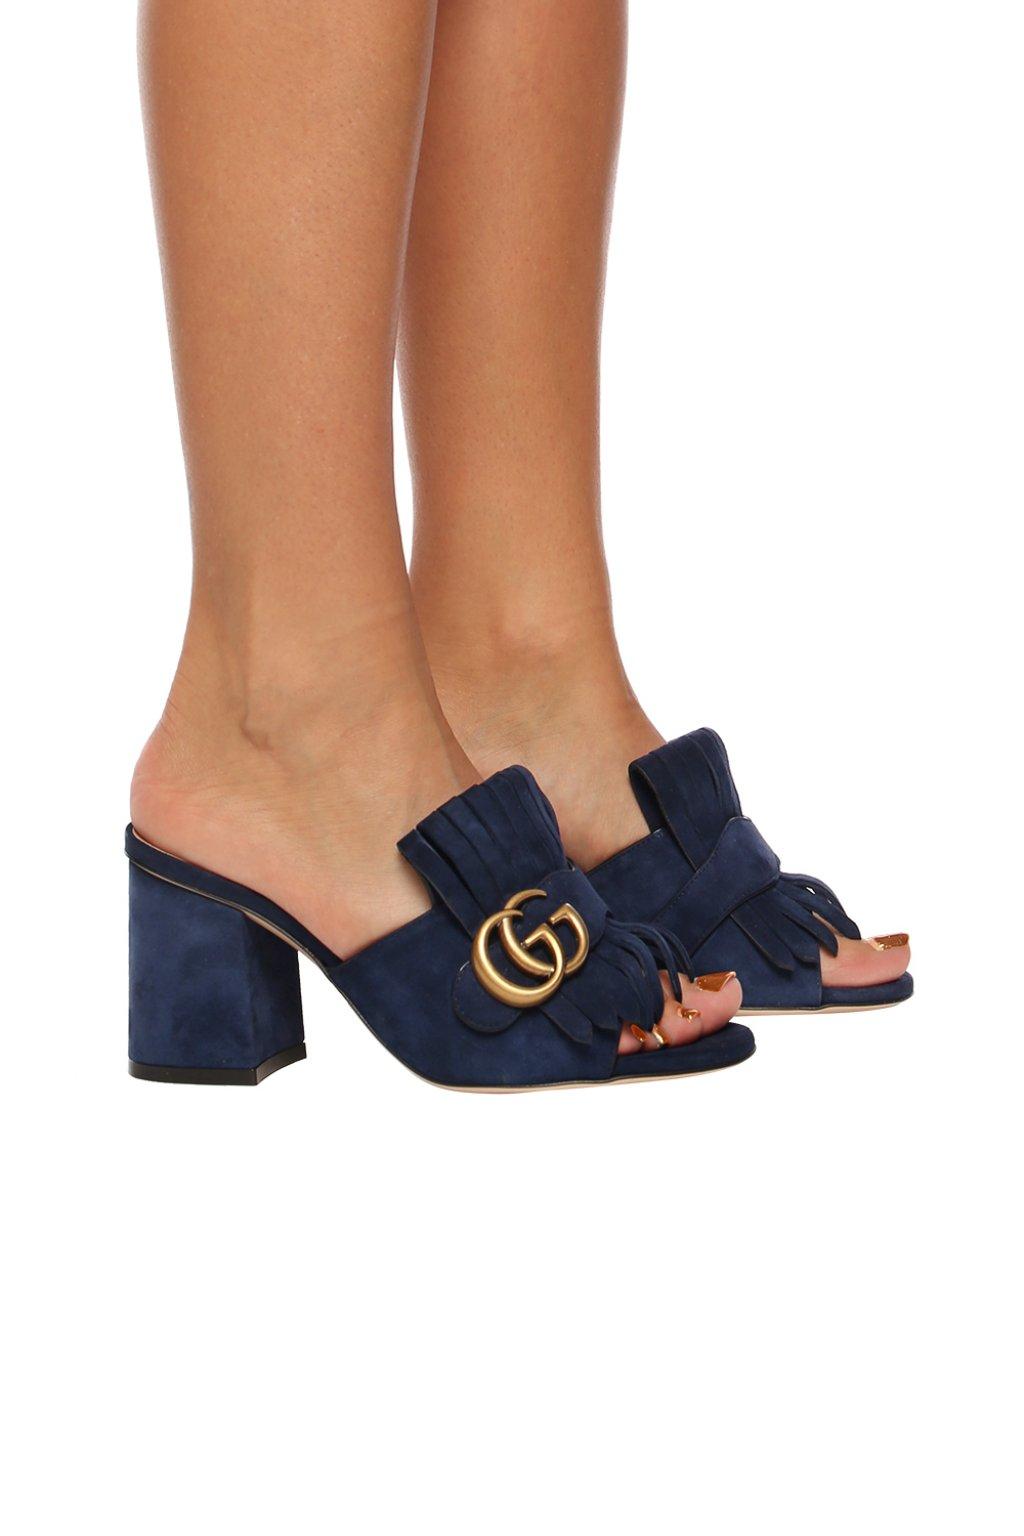 Gucci Suede Mid Heel Gg Mules in Navy 